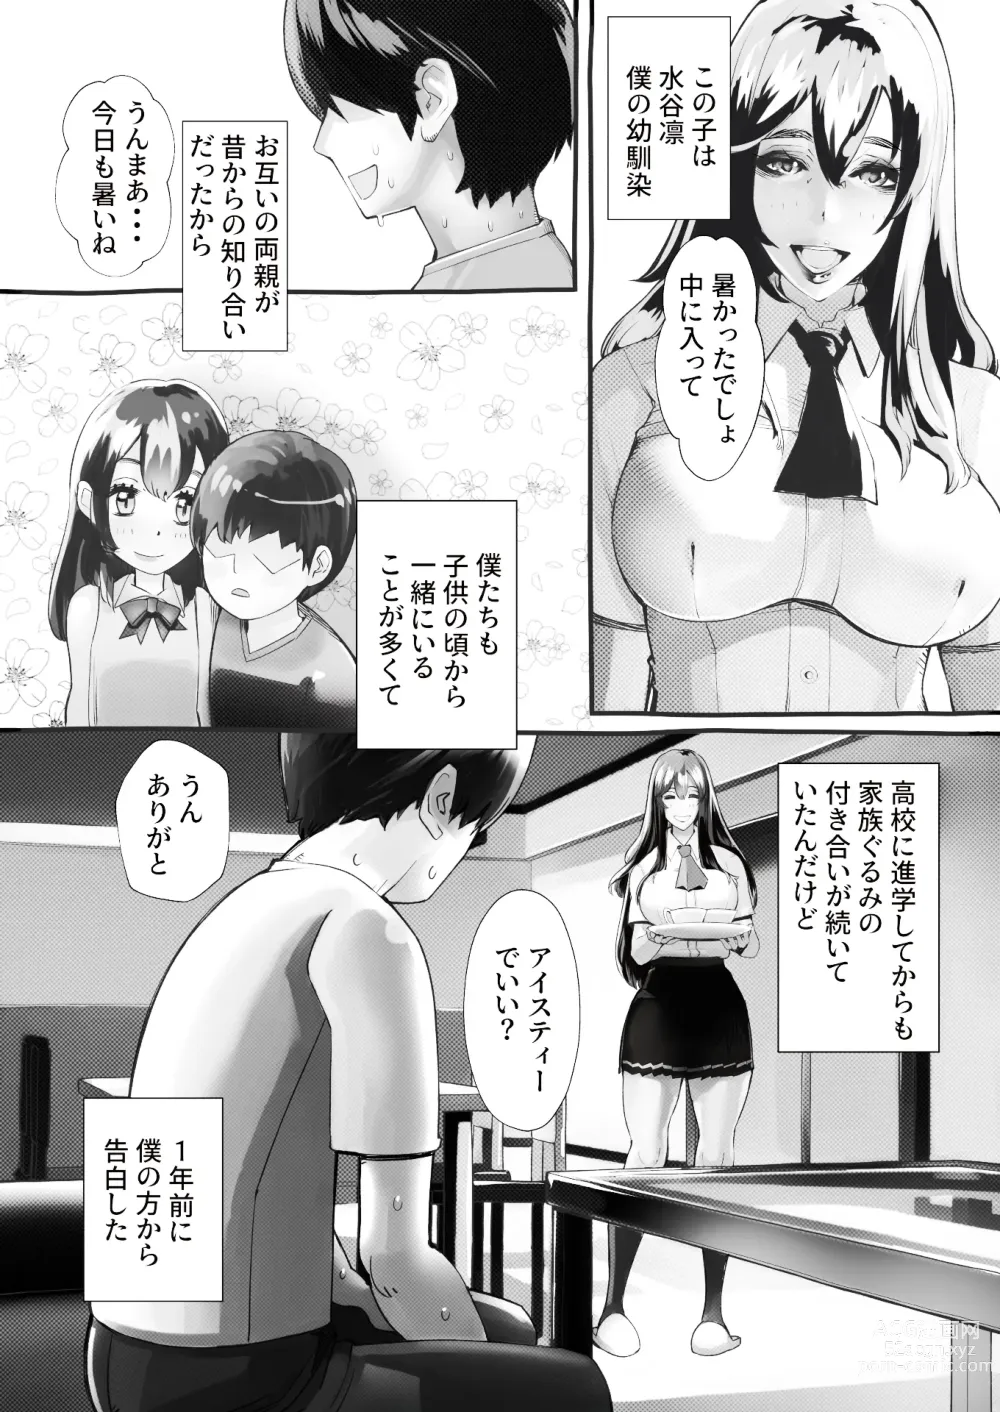 Page 4 of doujinshi 僕の彼女が他人棒で絶頂いたす